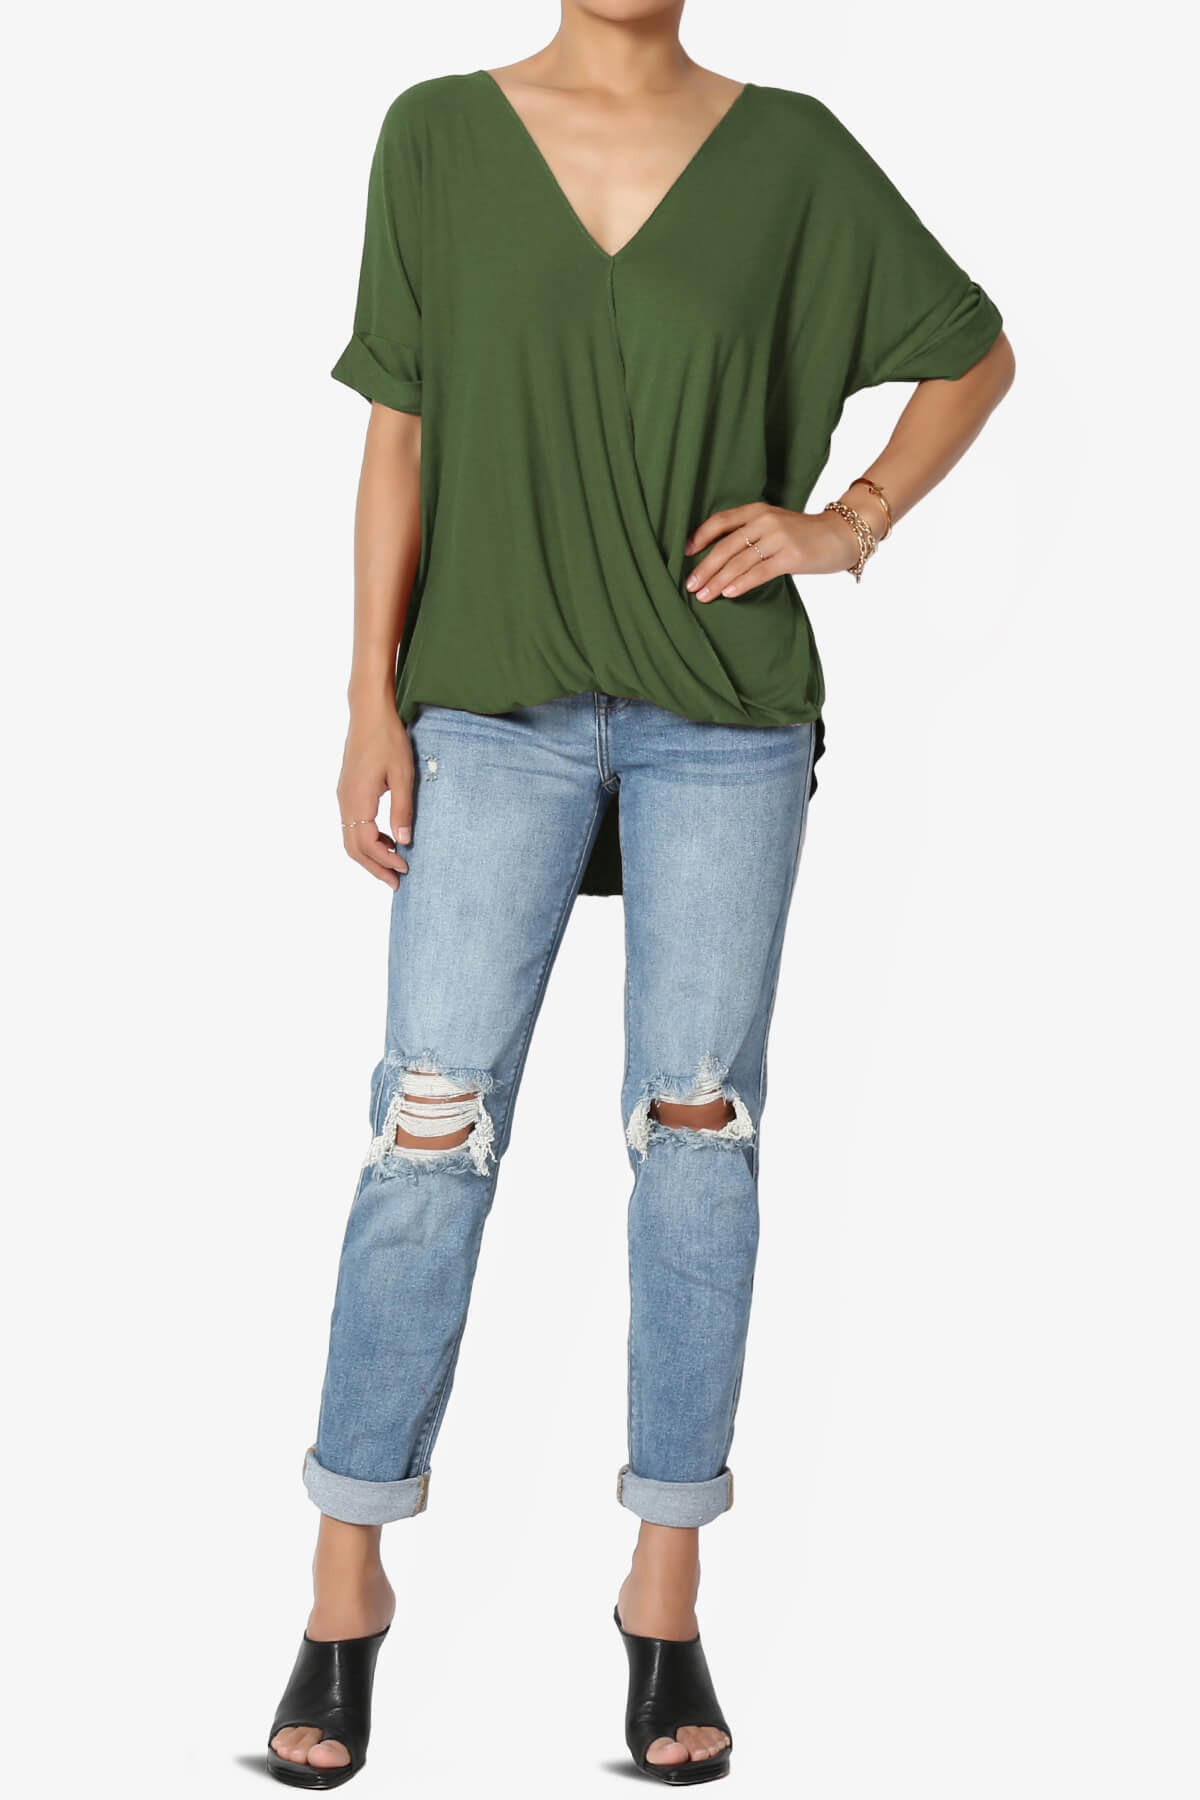 Tackle Wrap Hi-Low Crepe Knit Top ARMY GREEN_6